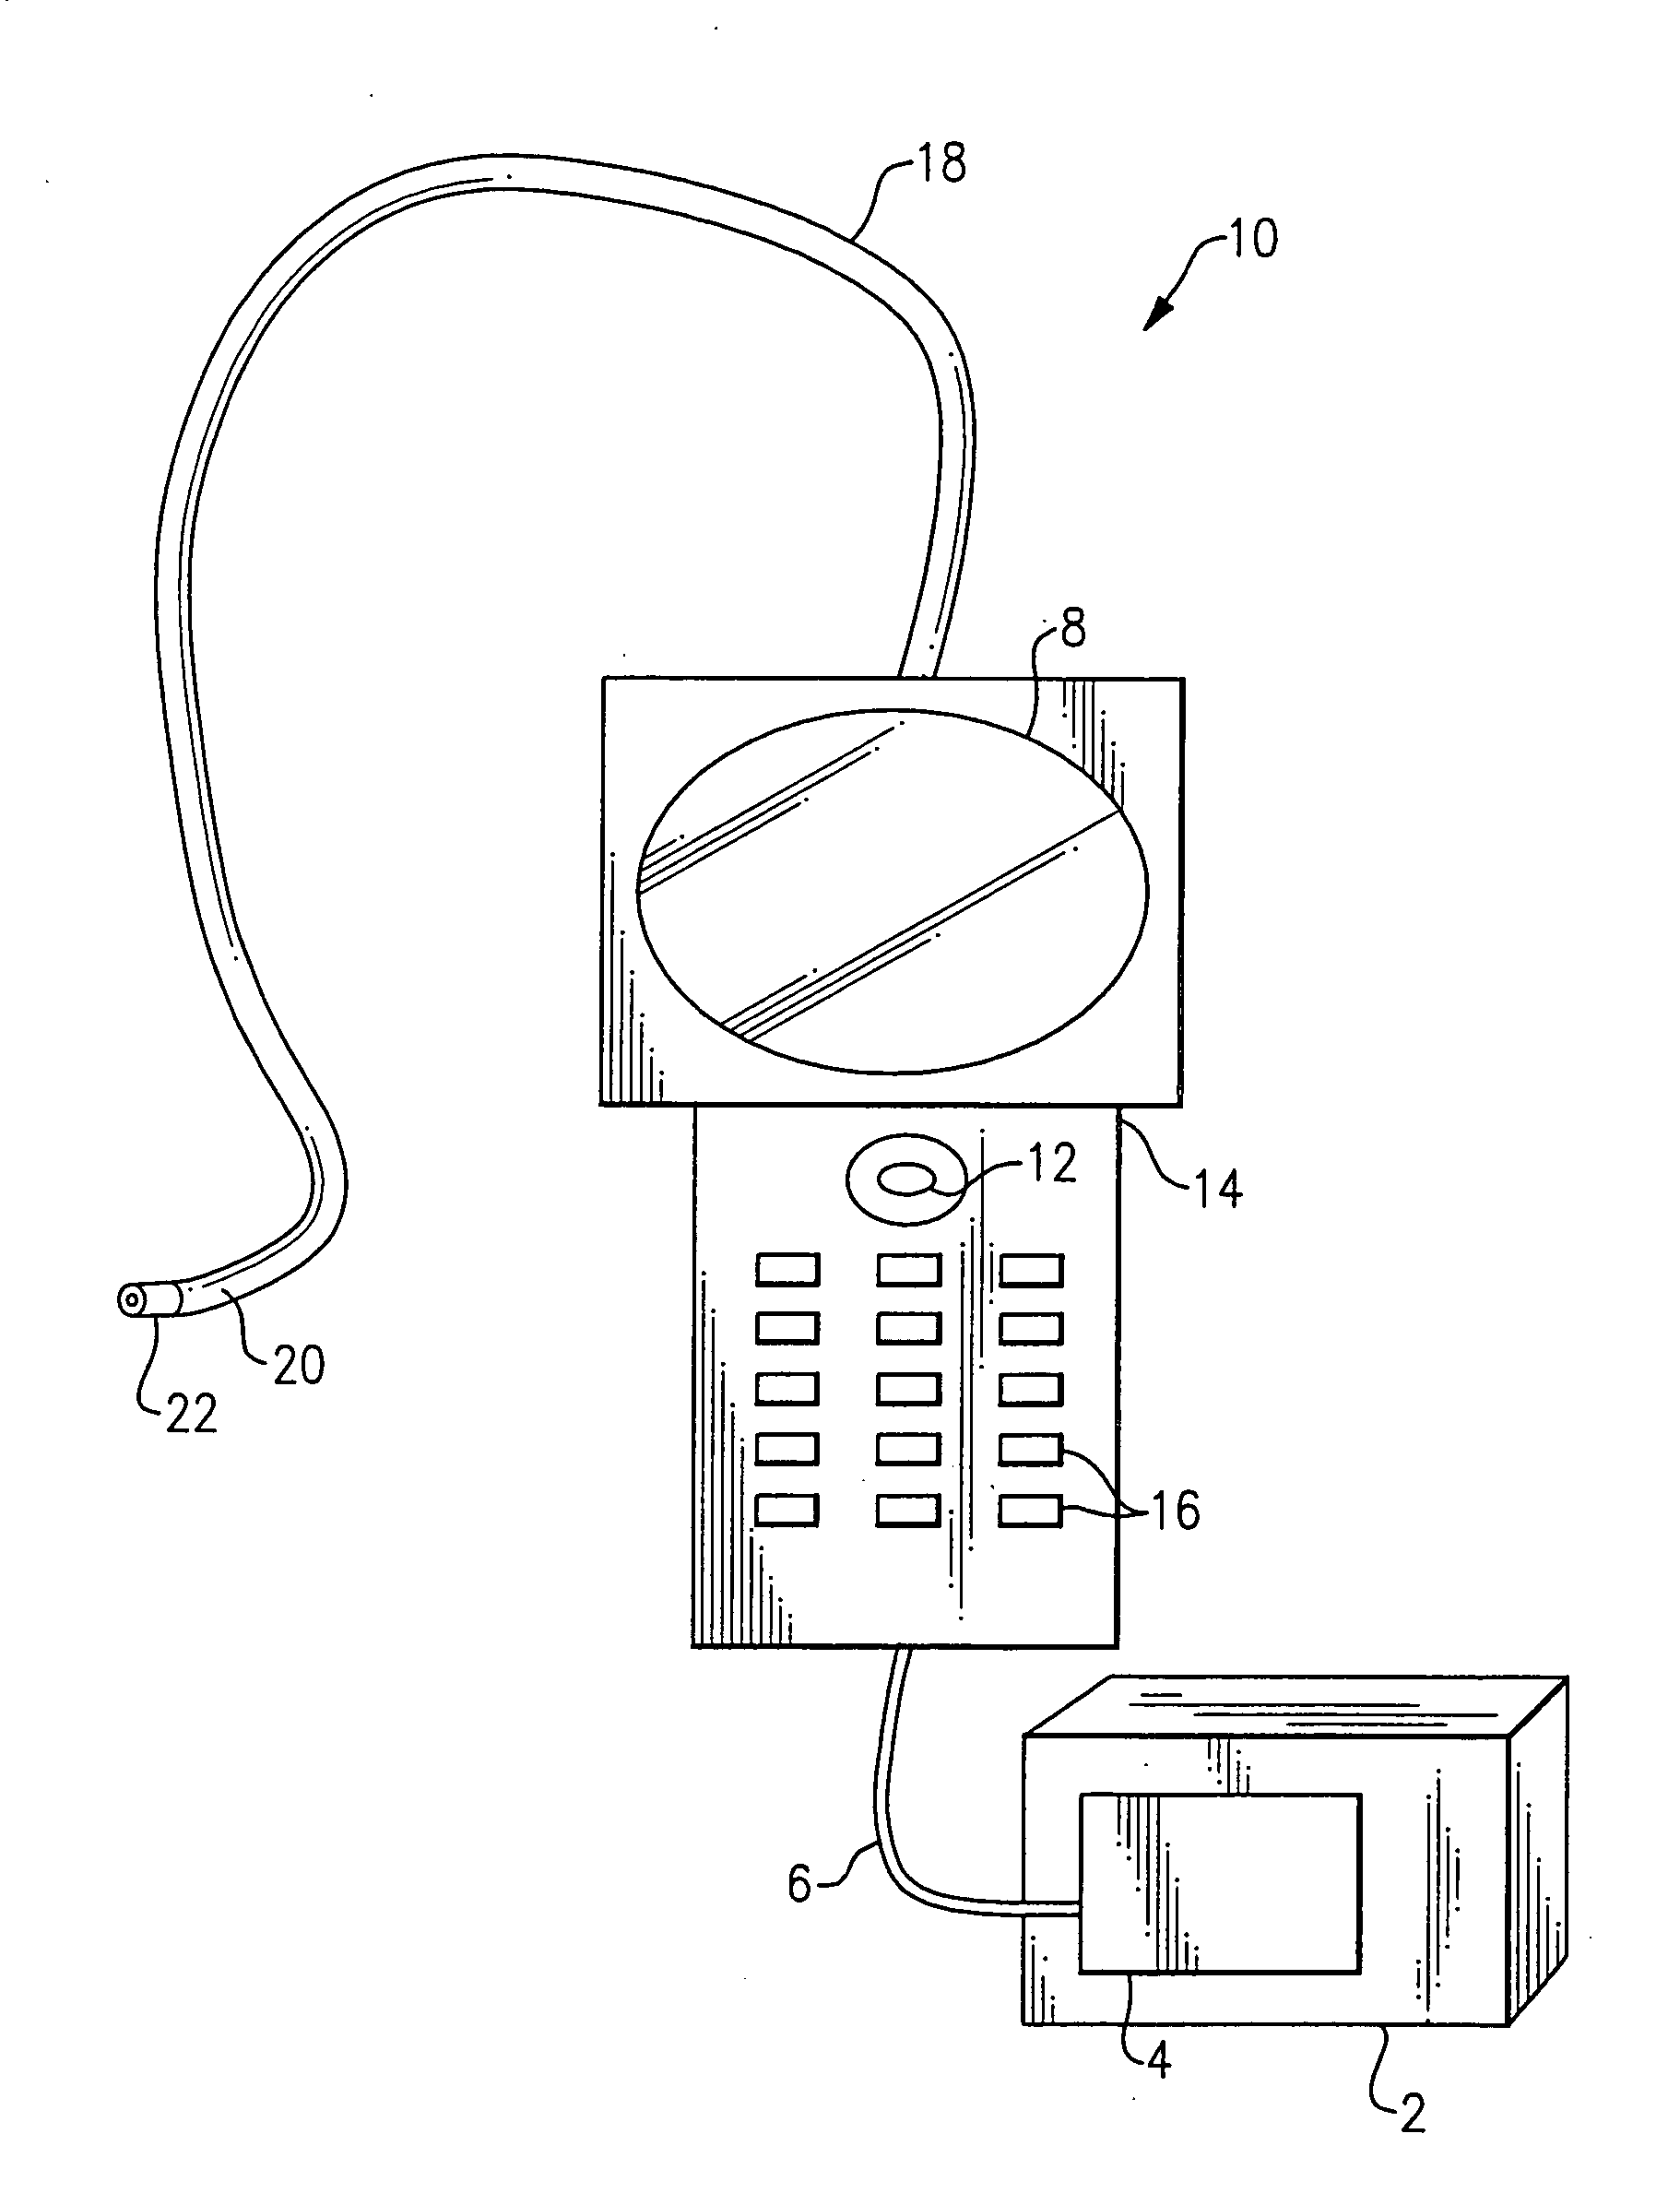 Method and apparatus for improving the operation of a remote viewing device